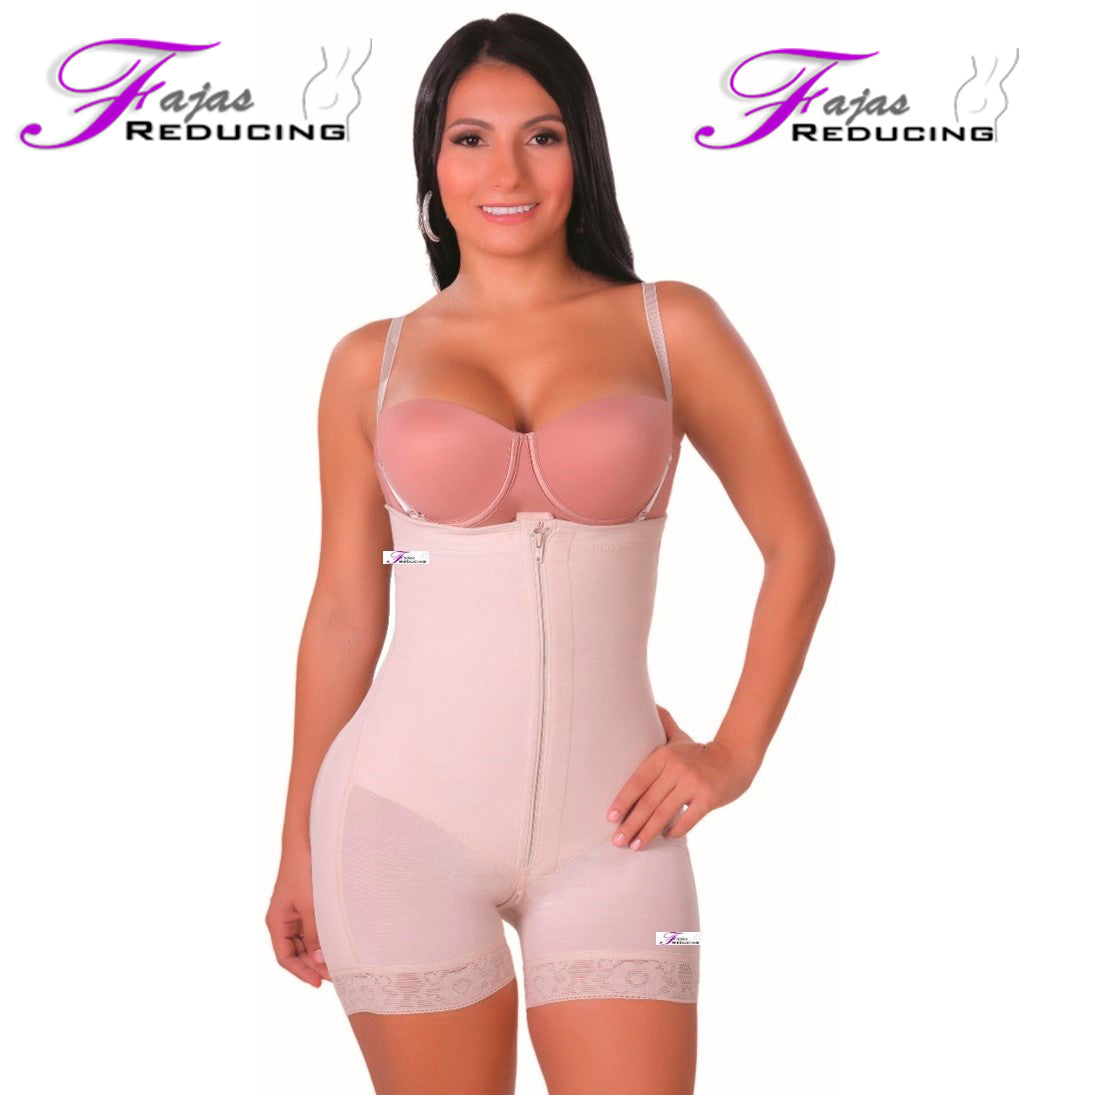 Colombian Short and Strapless Body Shaper - Faja reductora short y